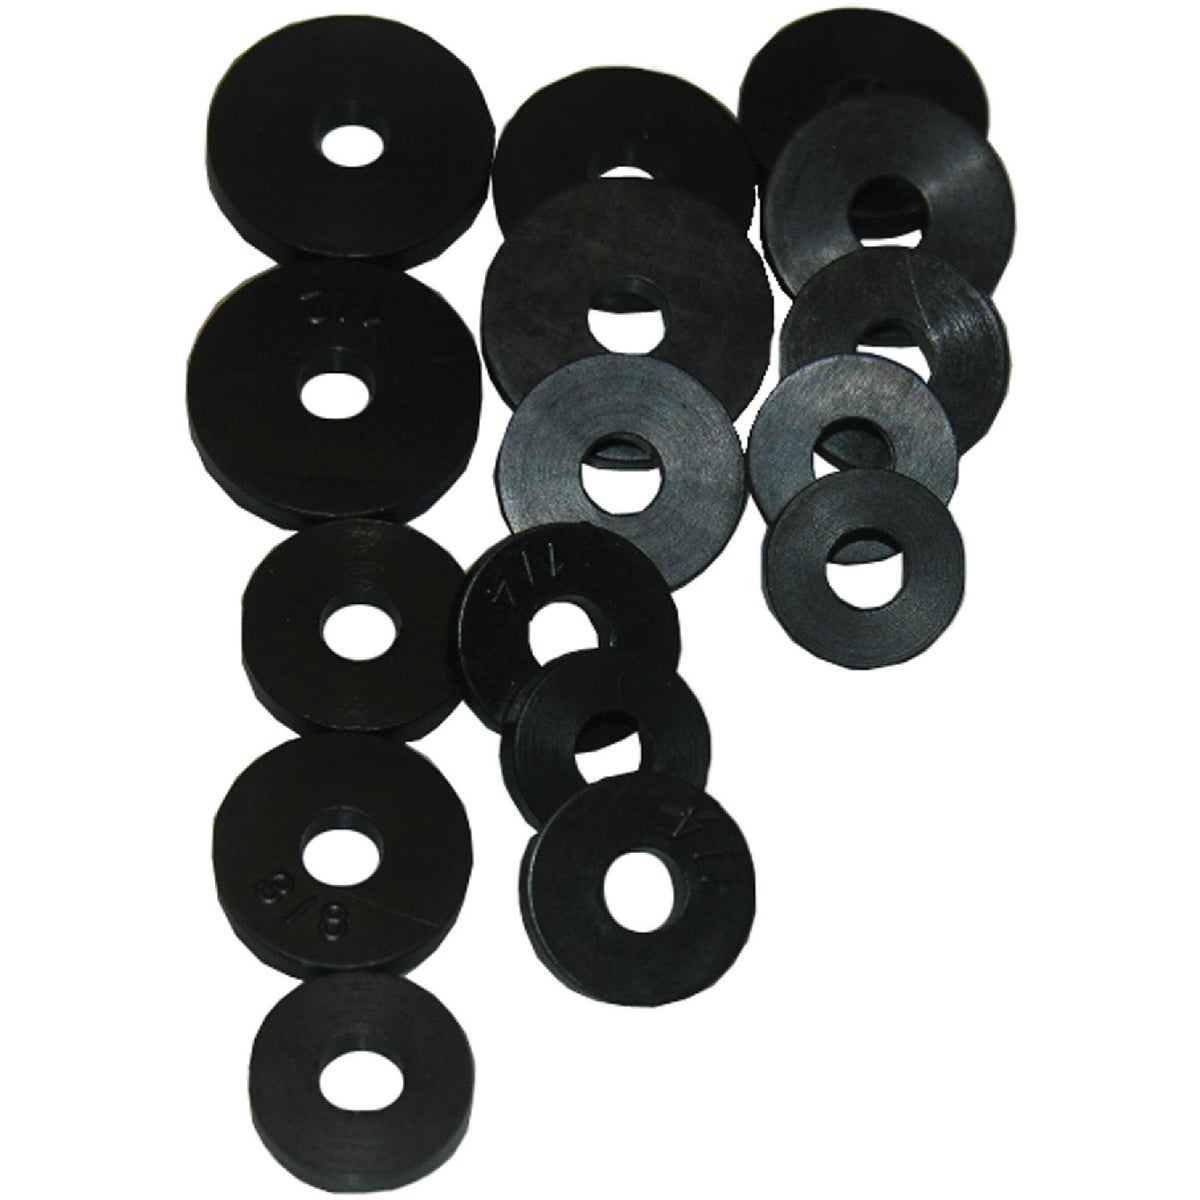 Lasco 02-1123 Lasco Assorted Black Assorted Flat Bibb Washers Faucet Washer (16 Ct.) 02-1123